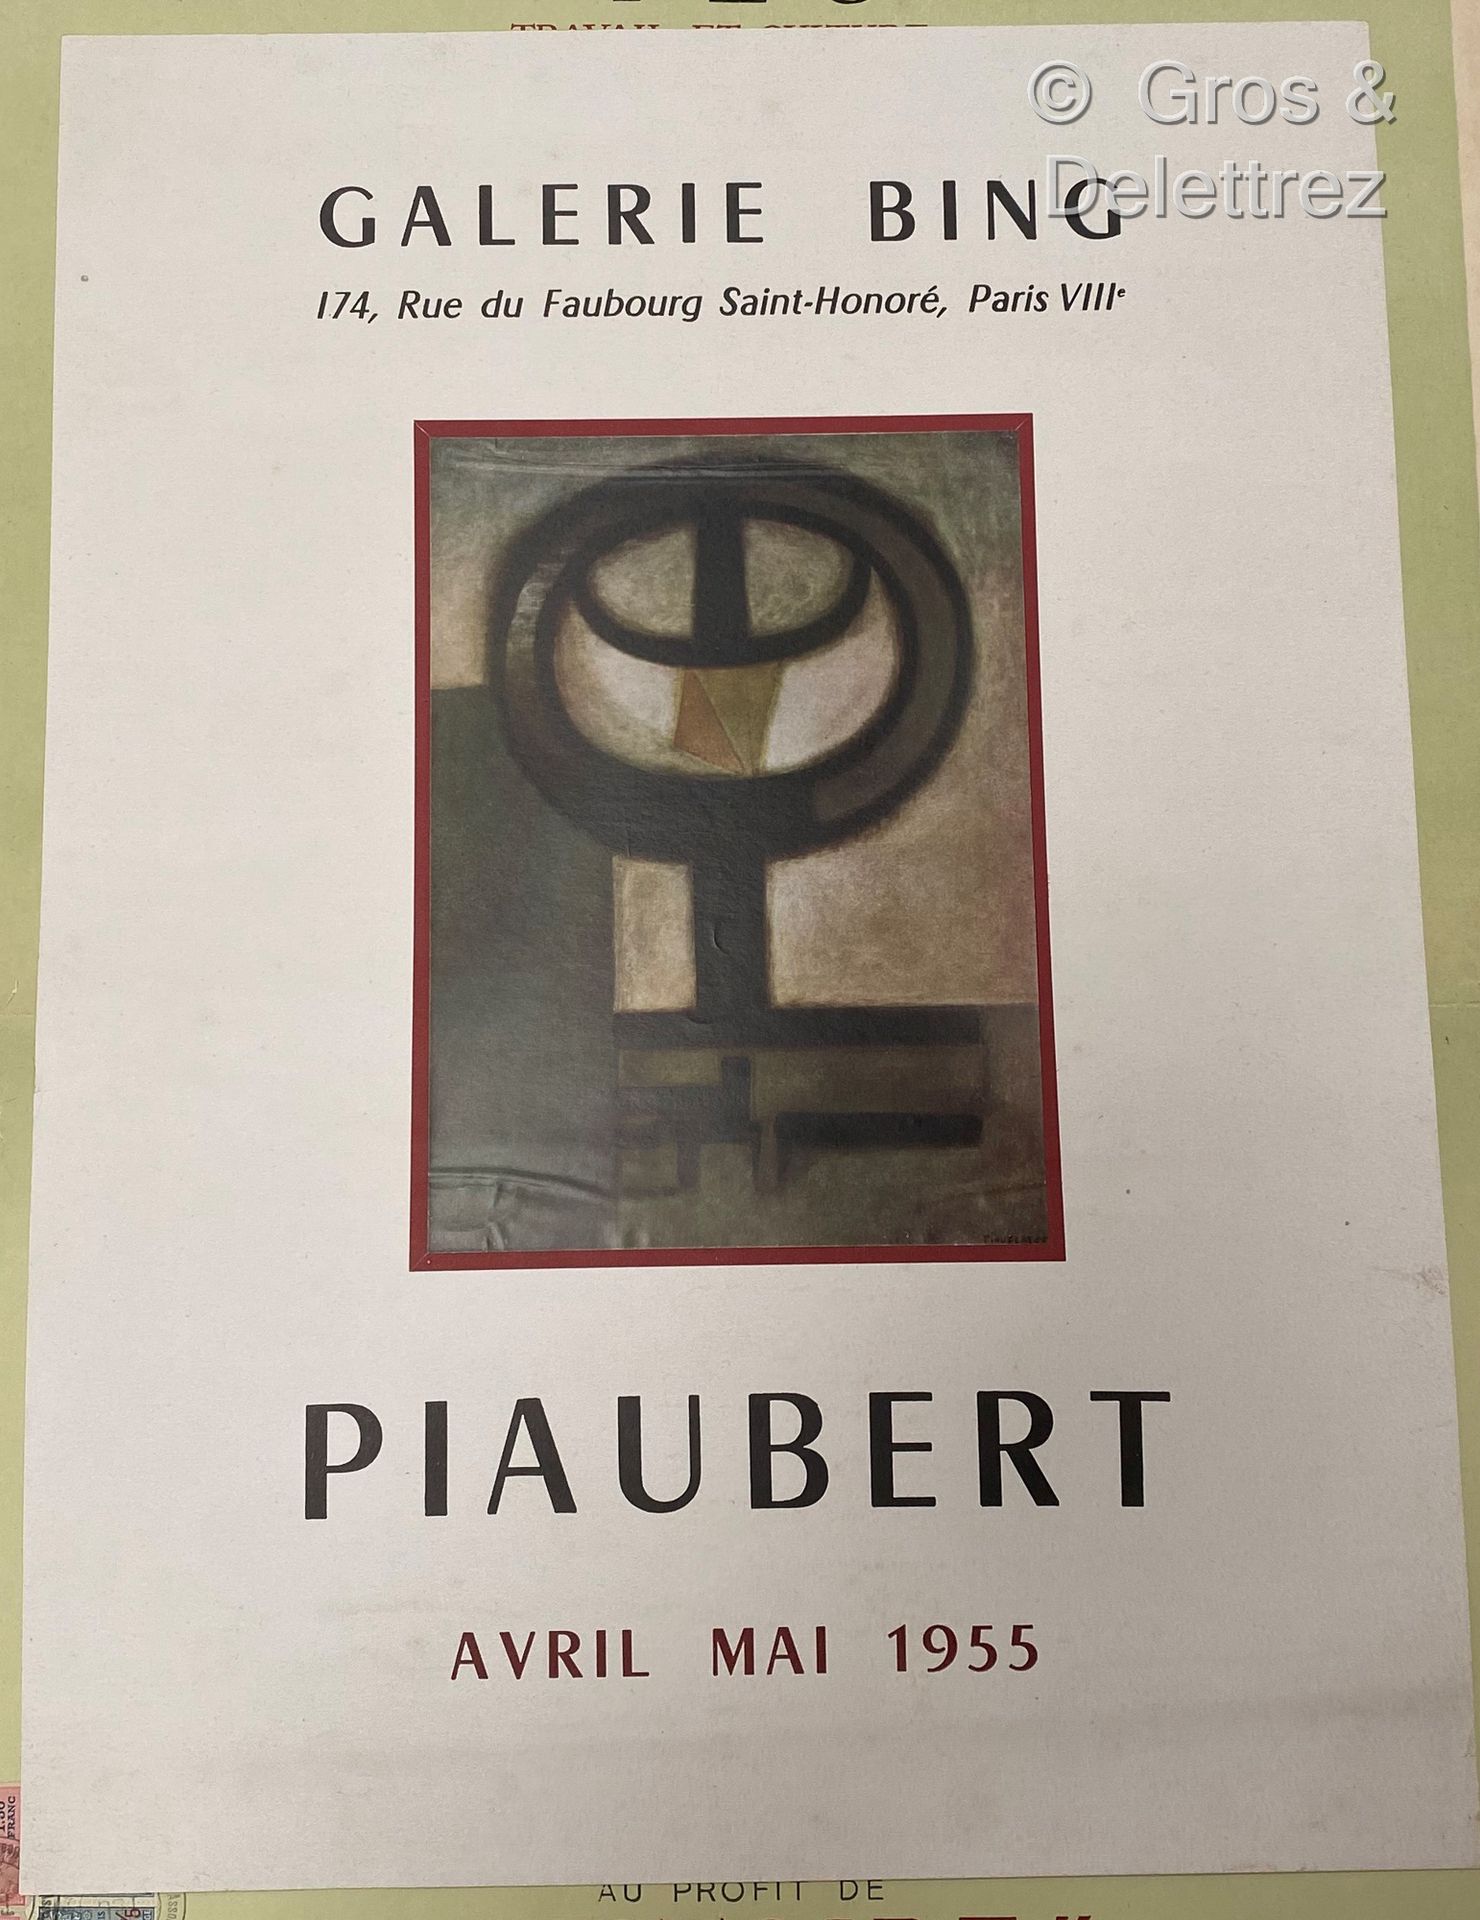 Null (E) PIAUBERT Jean

Poster for the Bing gallery

April / May 1955

60 x 45 c&hellip;